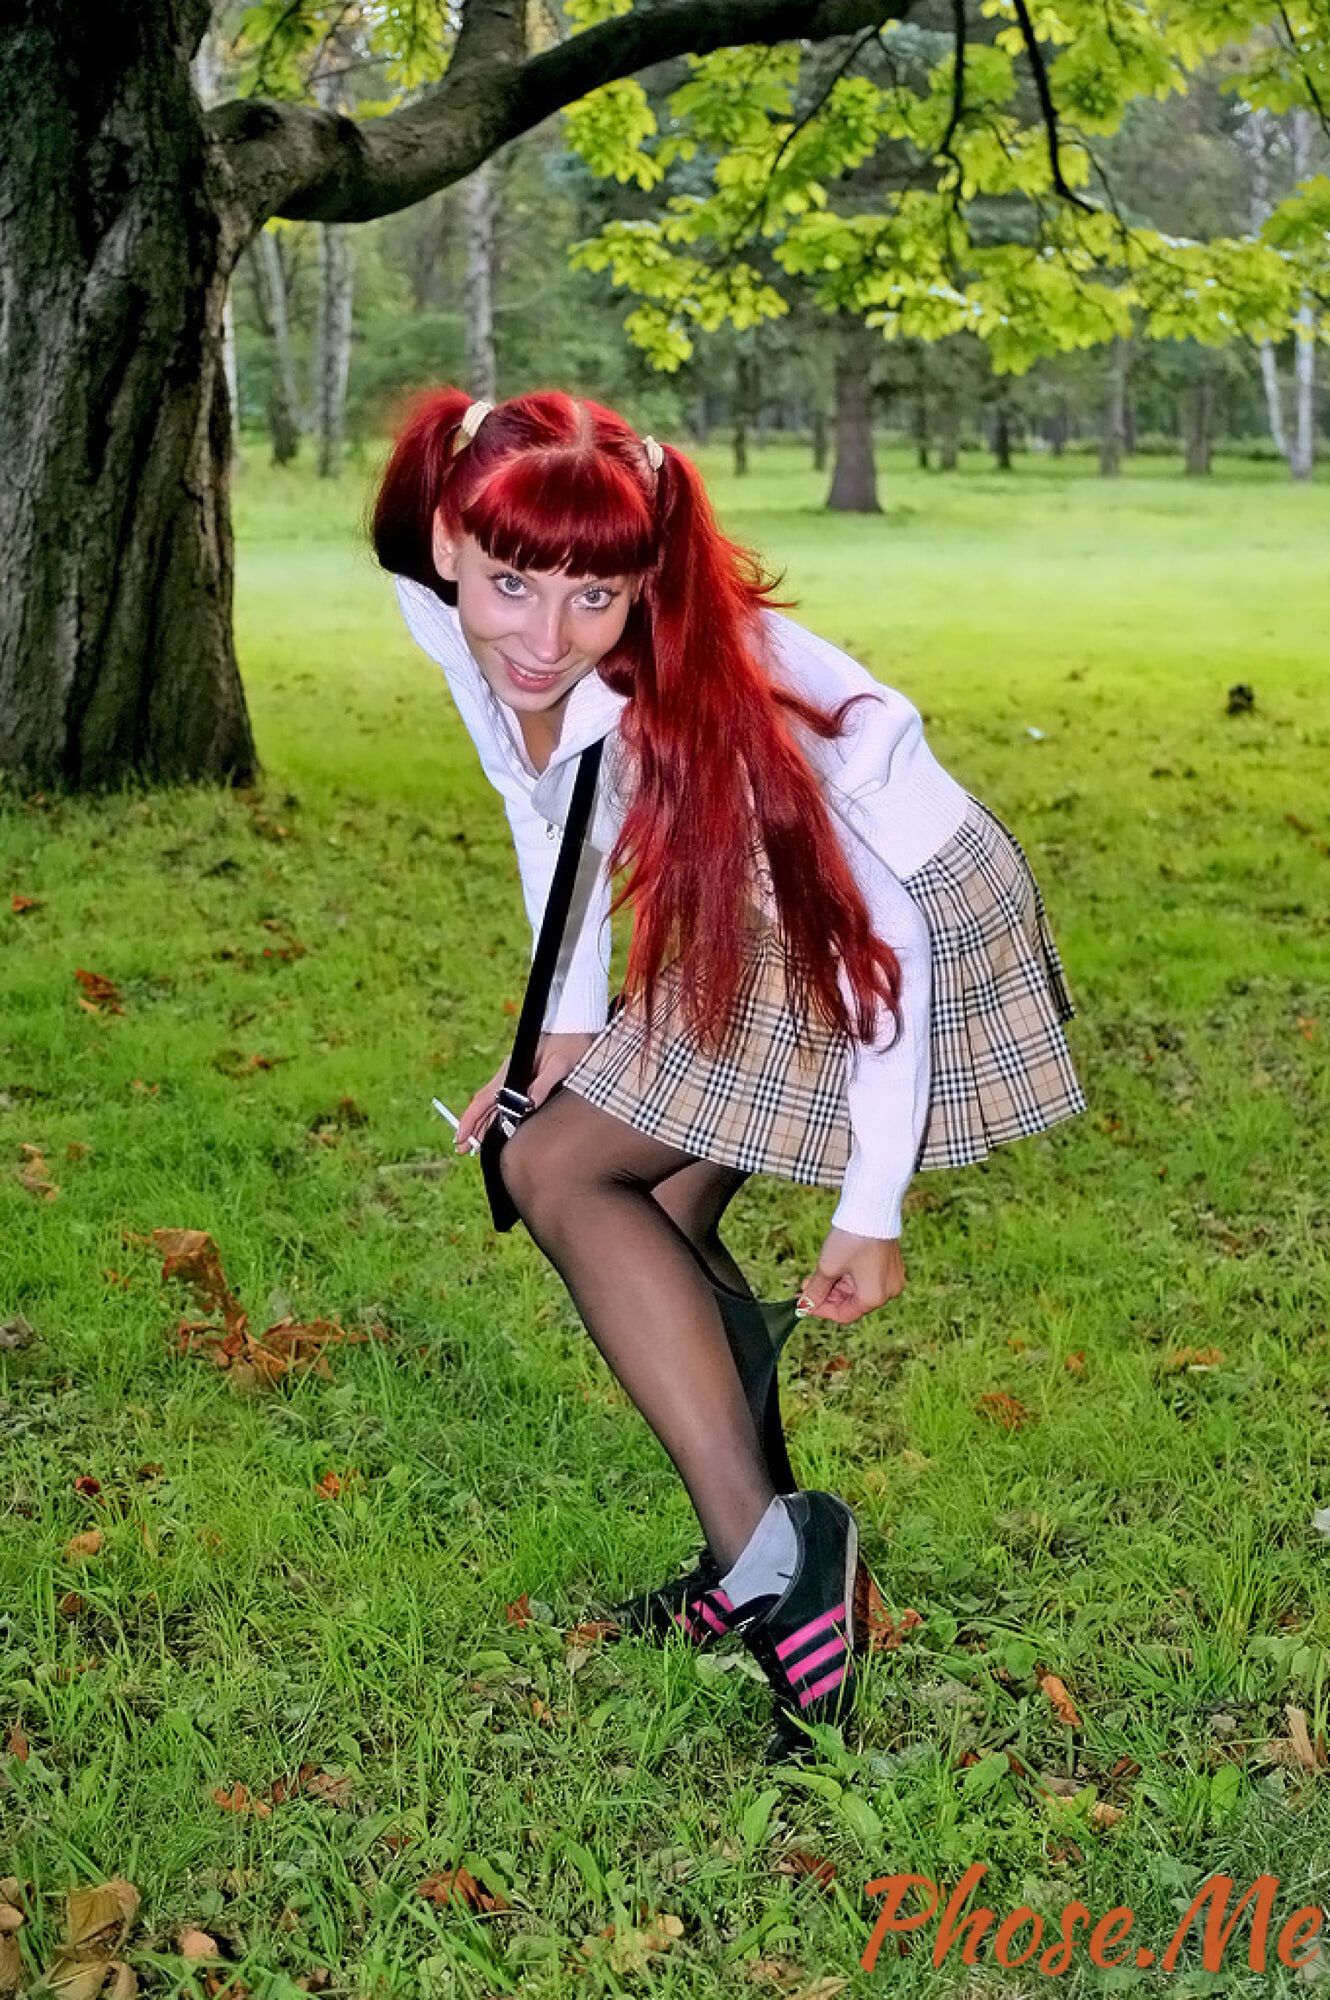 Redhead Outdoors In Plaid Skirt and Black Pantyhose #3